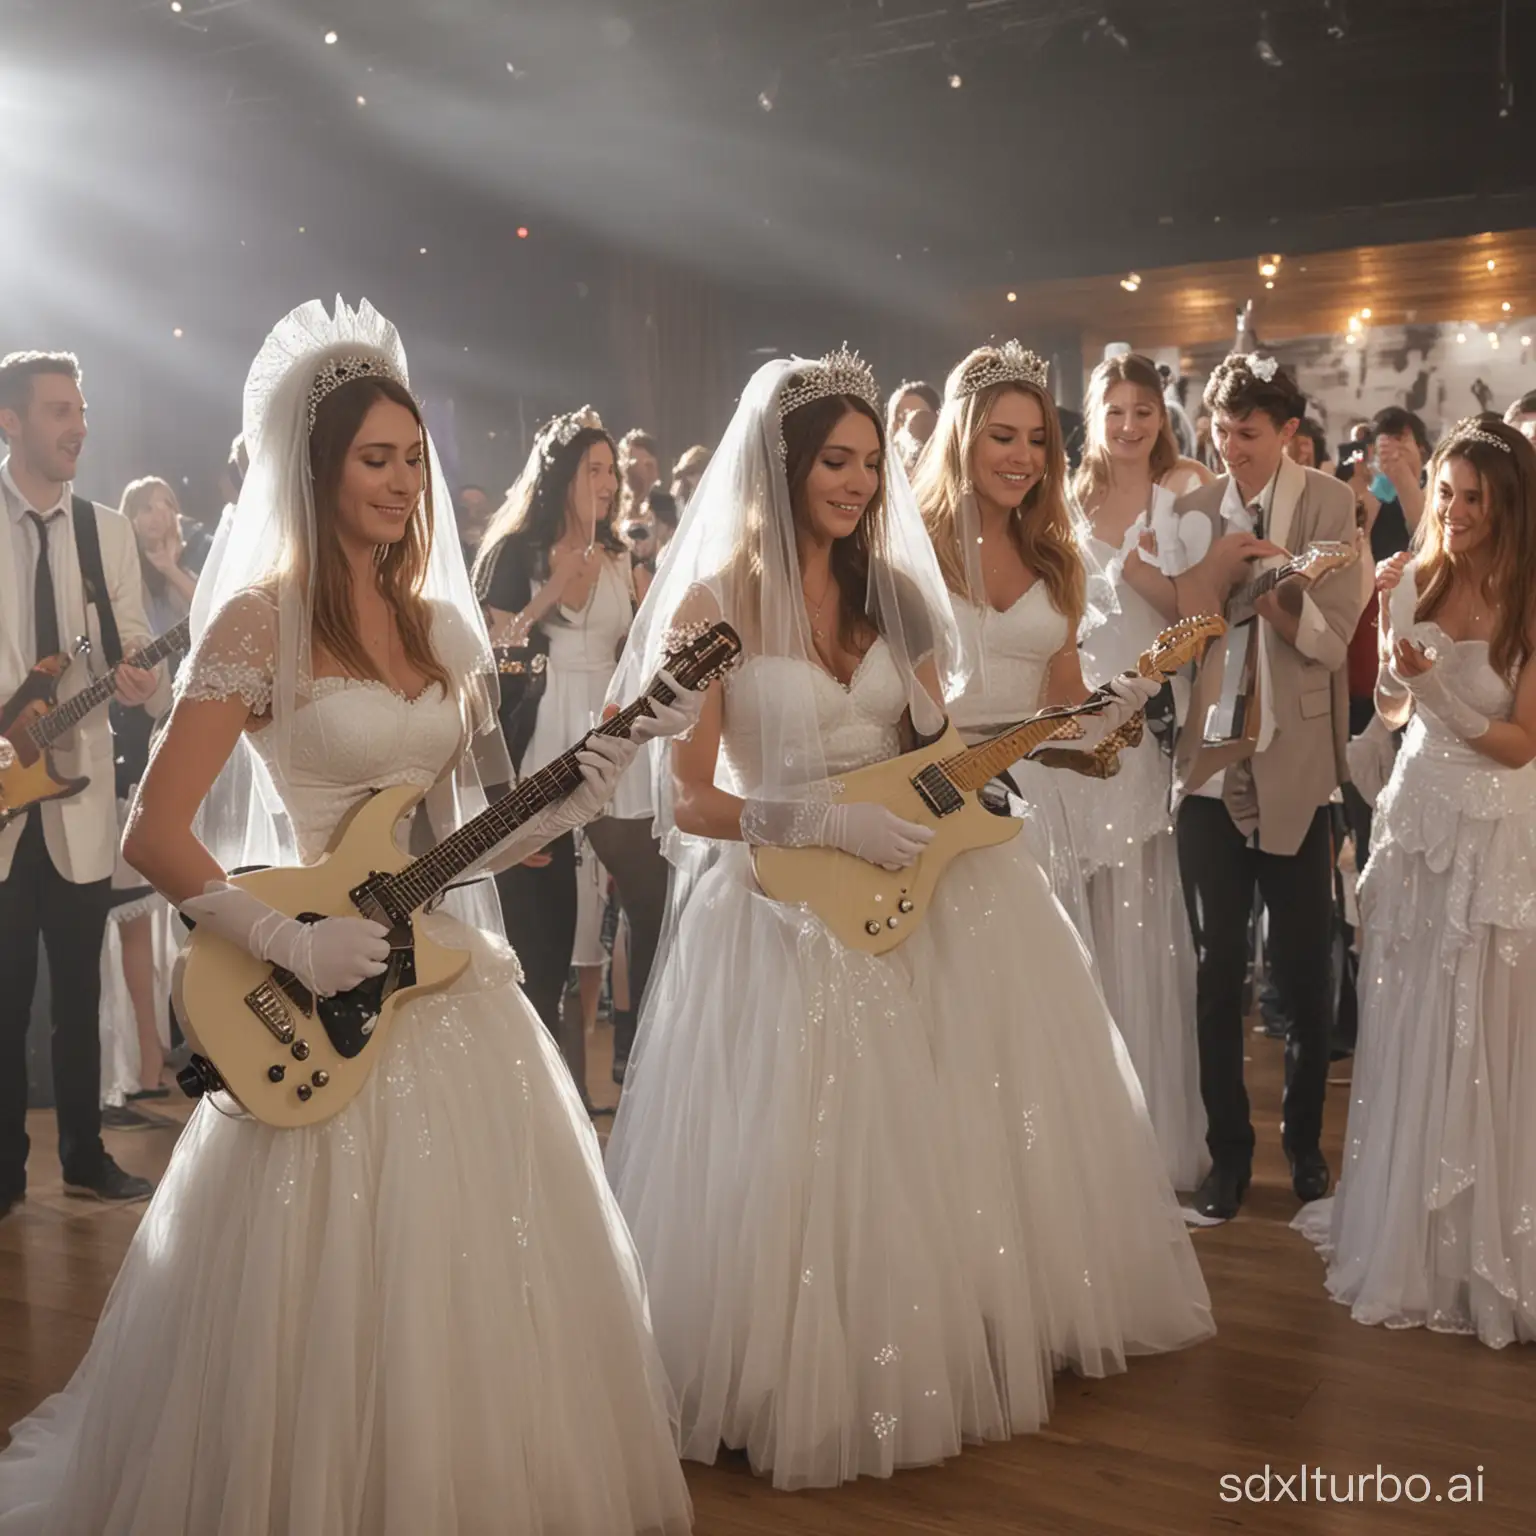 Brides-Playing-Guitars-on-Stage-with-Spectators-Filming